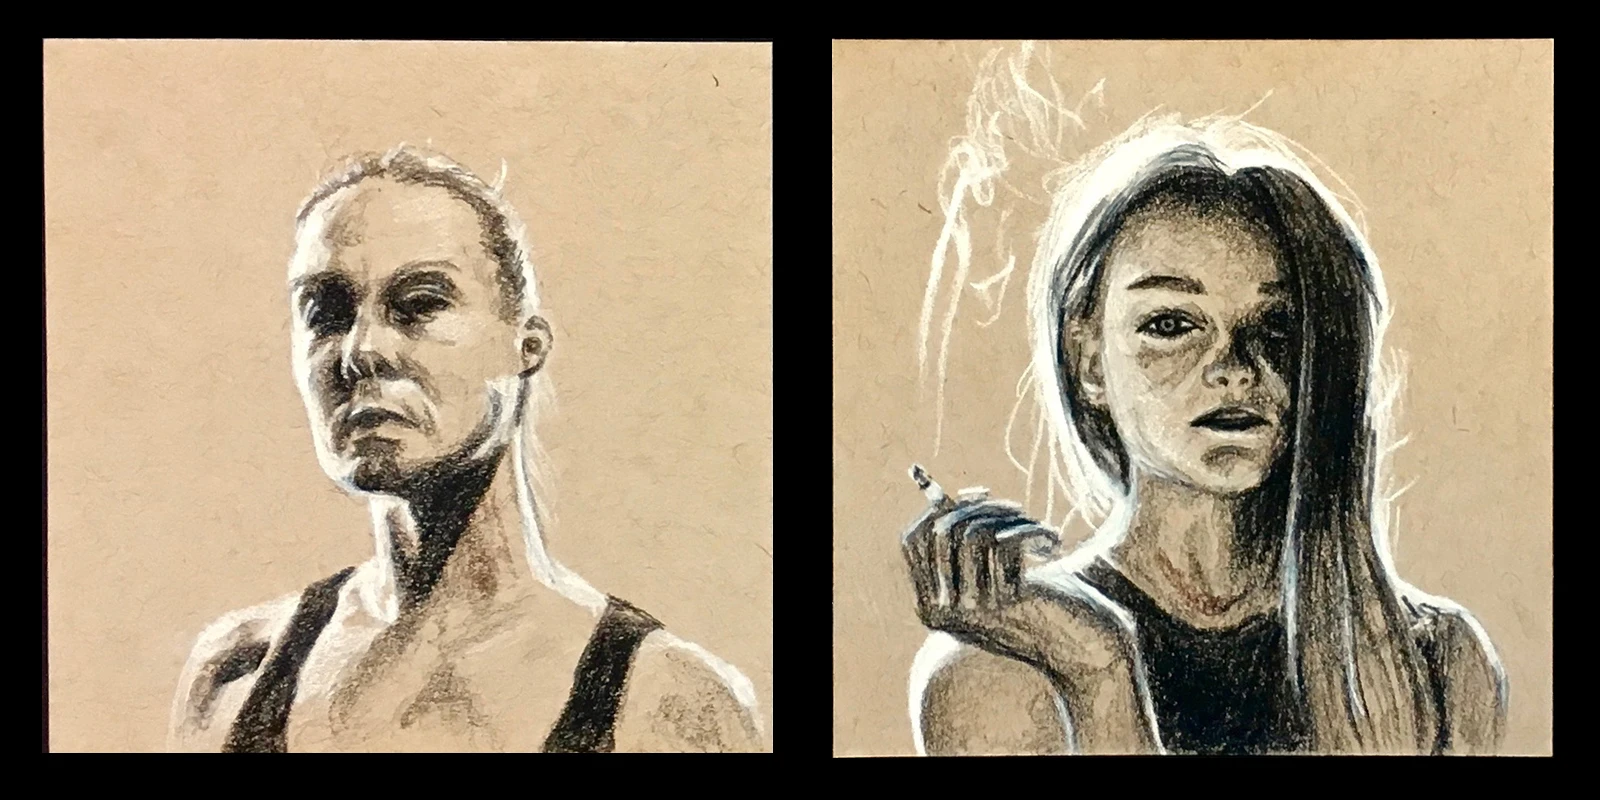 Charcoal drawings with a backlight